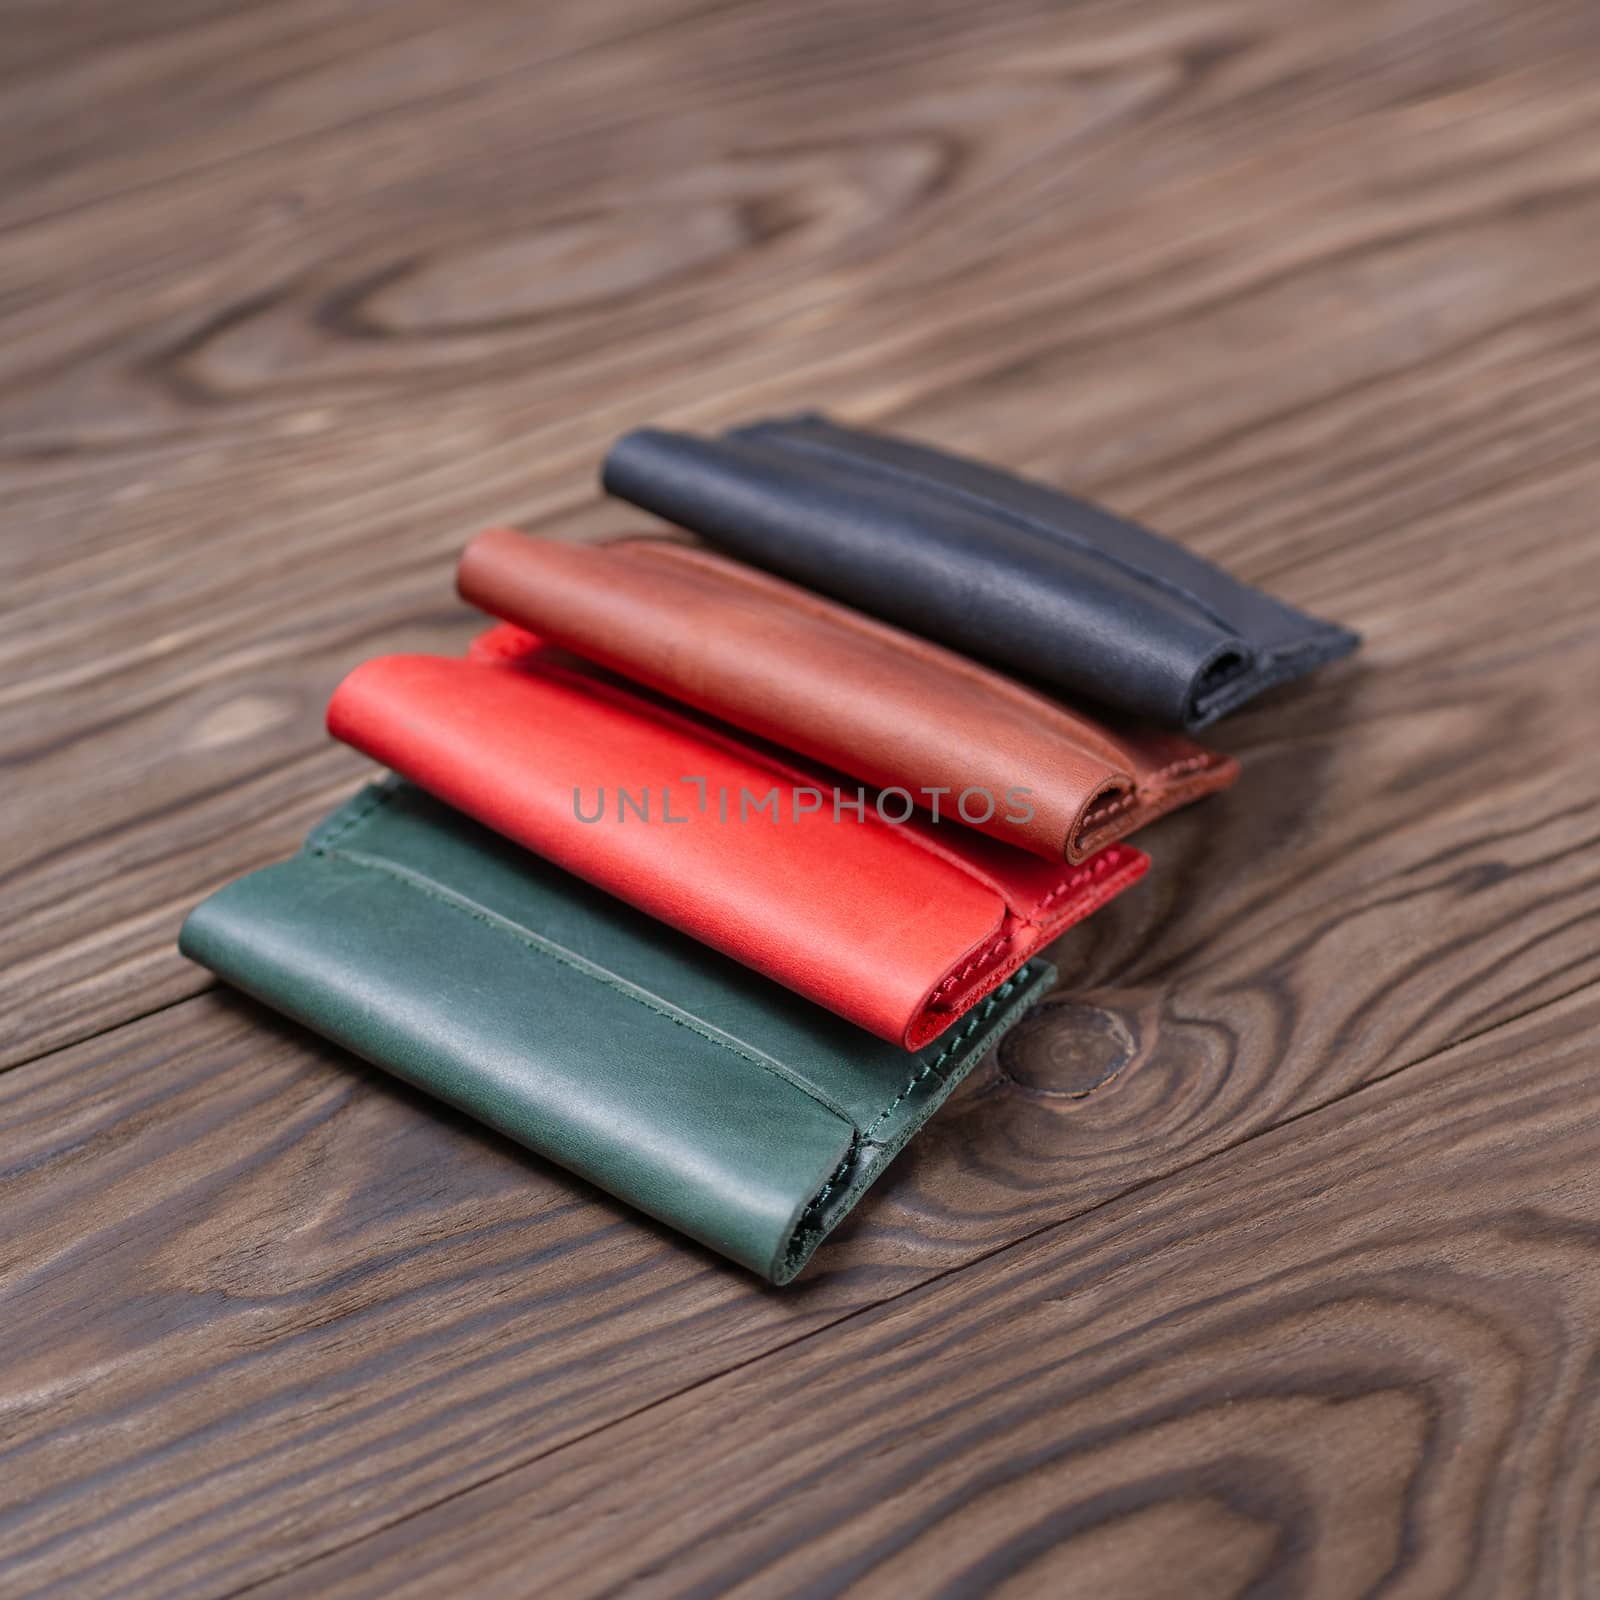 Flat lay photo of four different colour handmade leather one pocket cardholders.  Red, black, ginger and green colors. Stock photo on wooden background. by alexsdriver